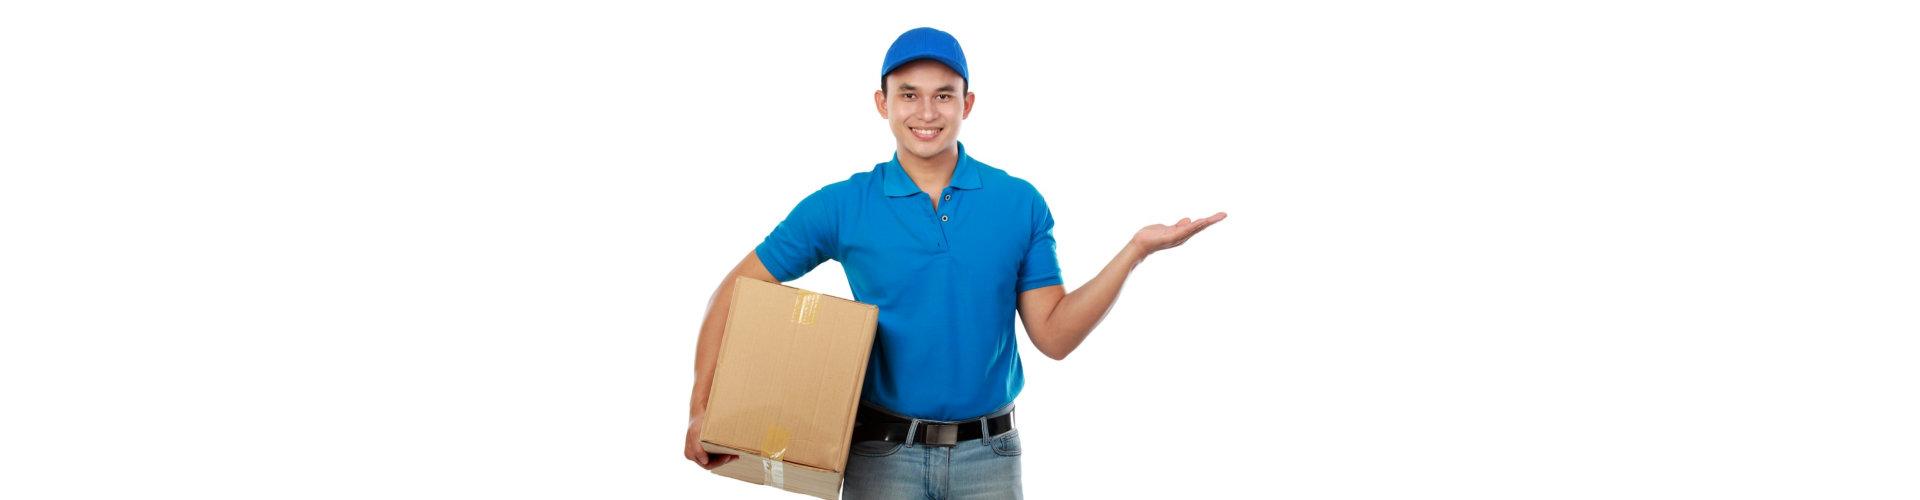 delivery man carrying a box